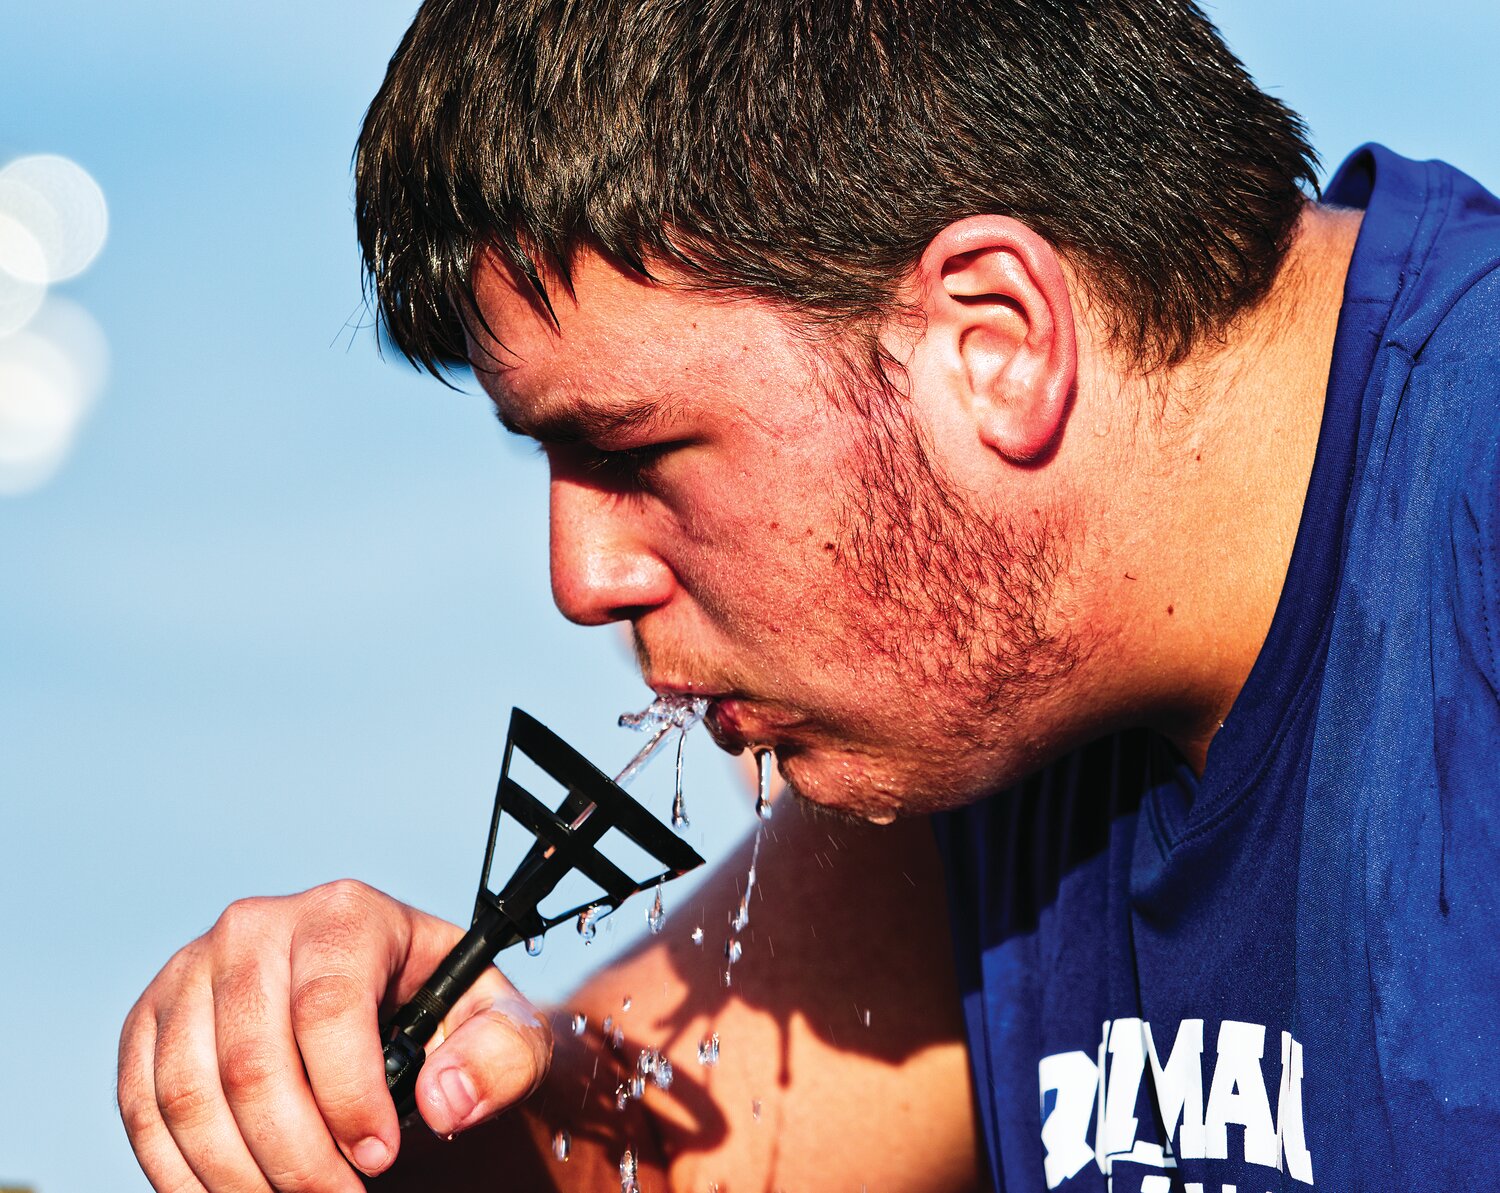 Quitman High School football player Dax Poe takes a water break during the first day of summer practice Monday evening. The Texas heat has led to plenty of precautions as athletes, band students and others have resumed their routines ahead of the return to classes later this month.